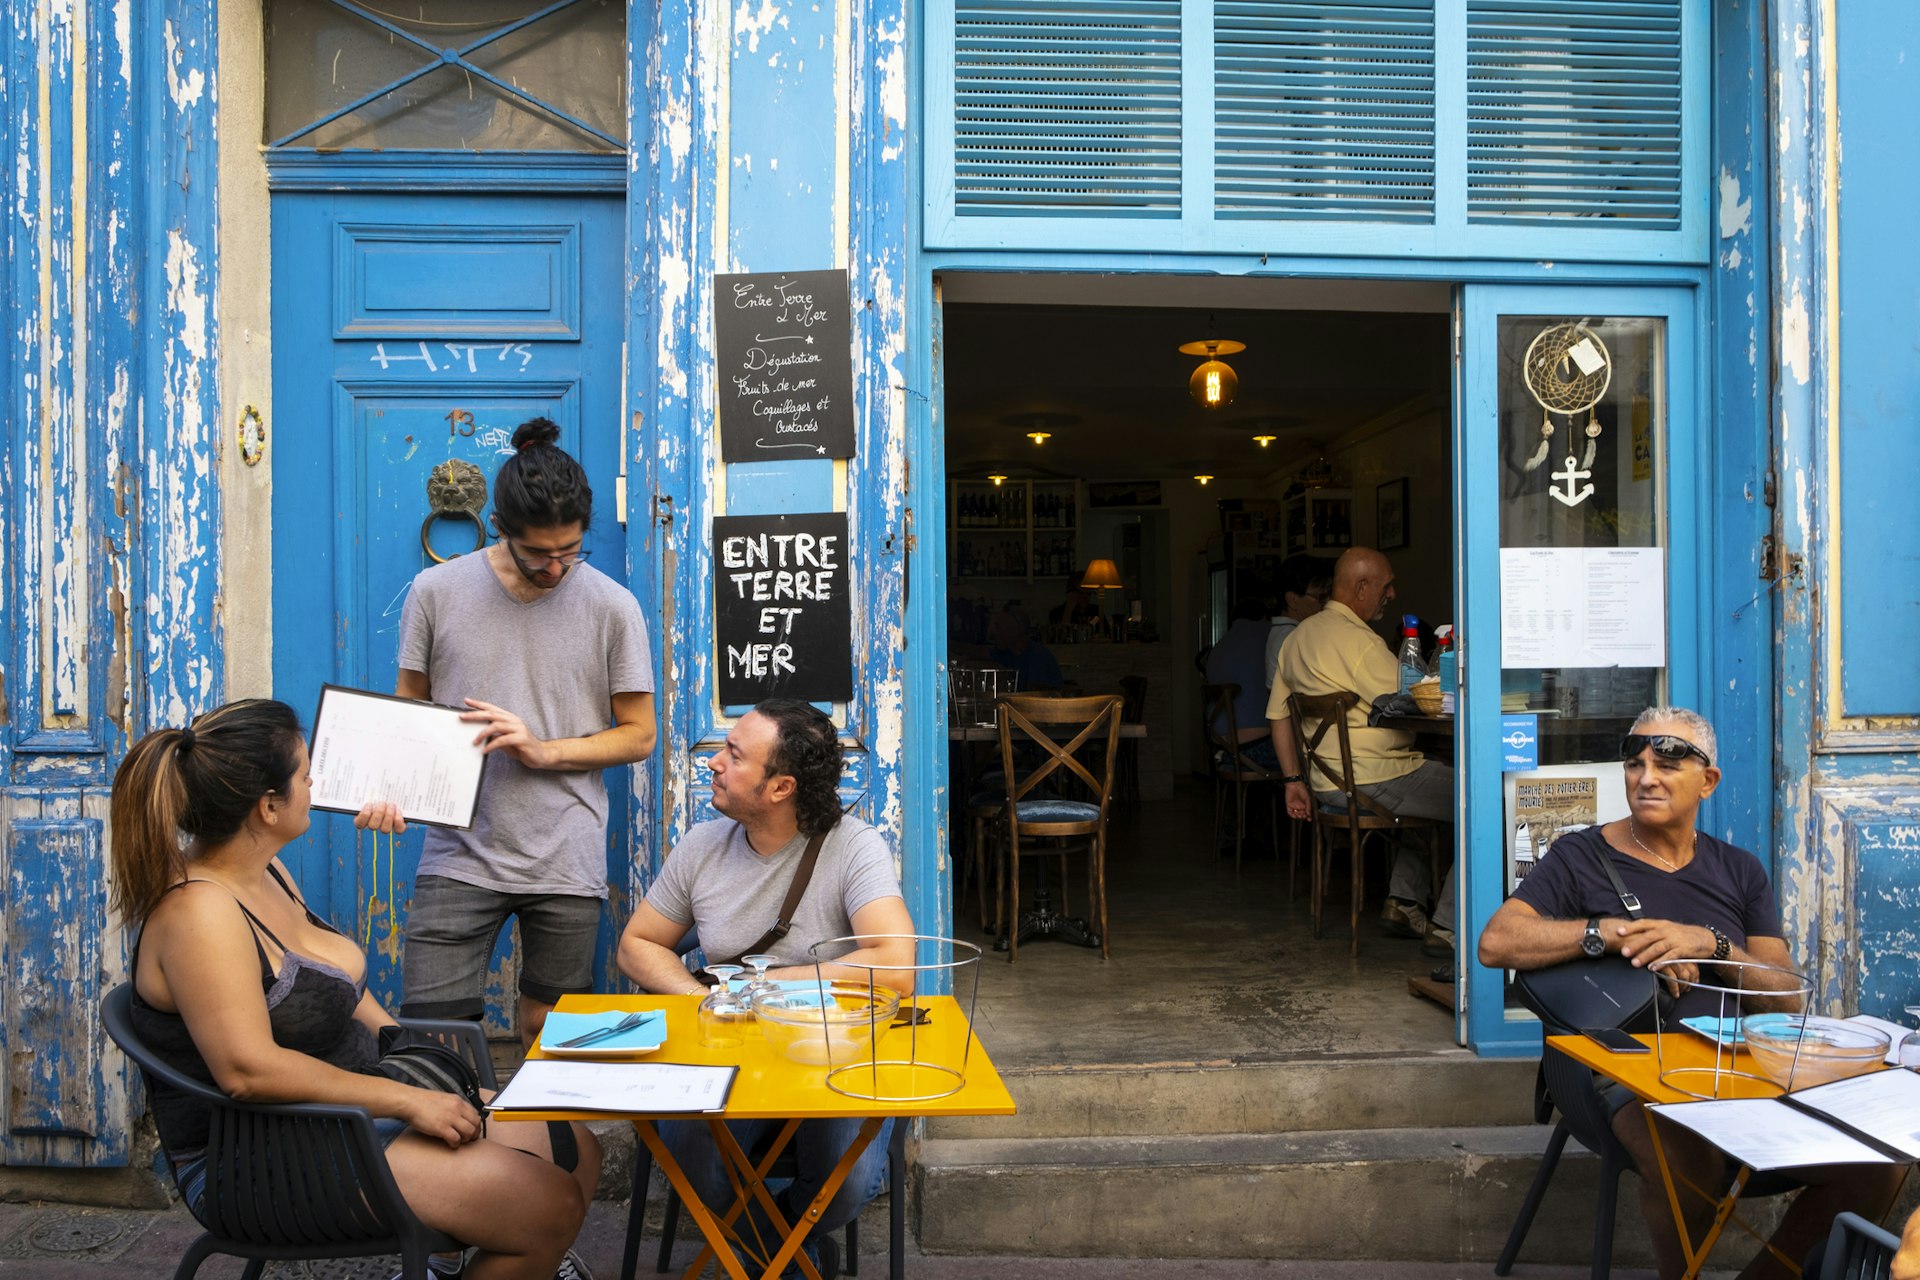 A waiter serves two people sat at a table outside a cafe with a blue facade